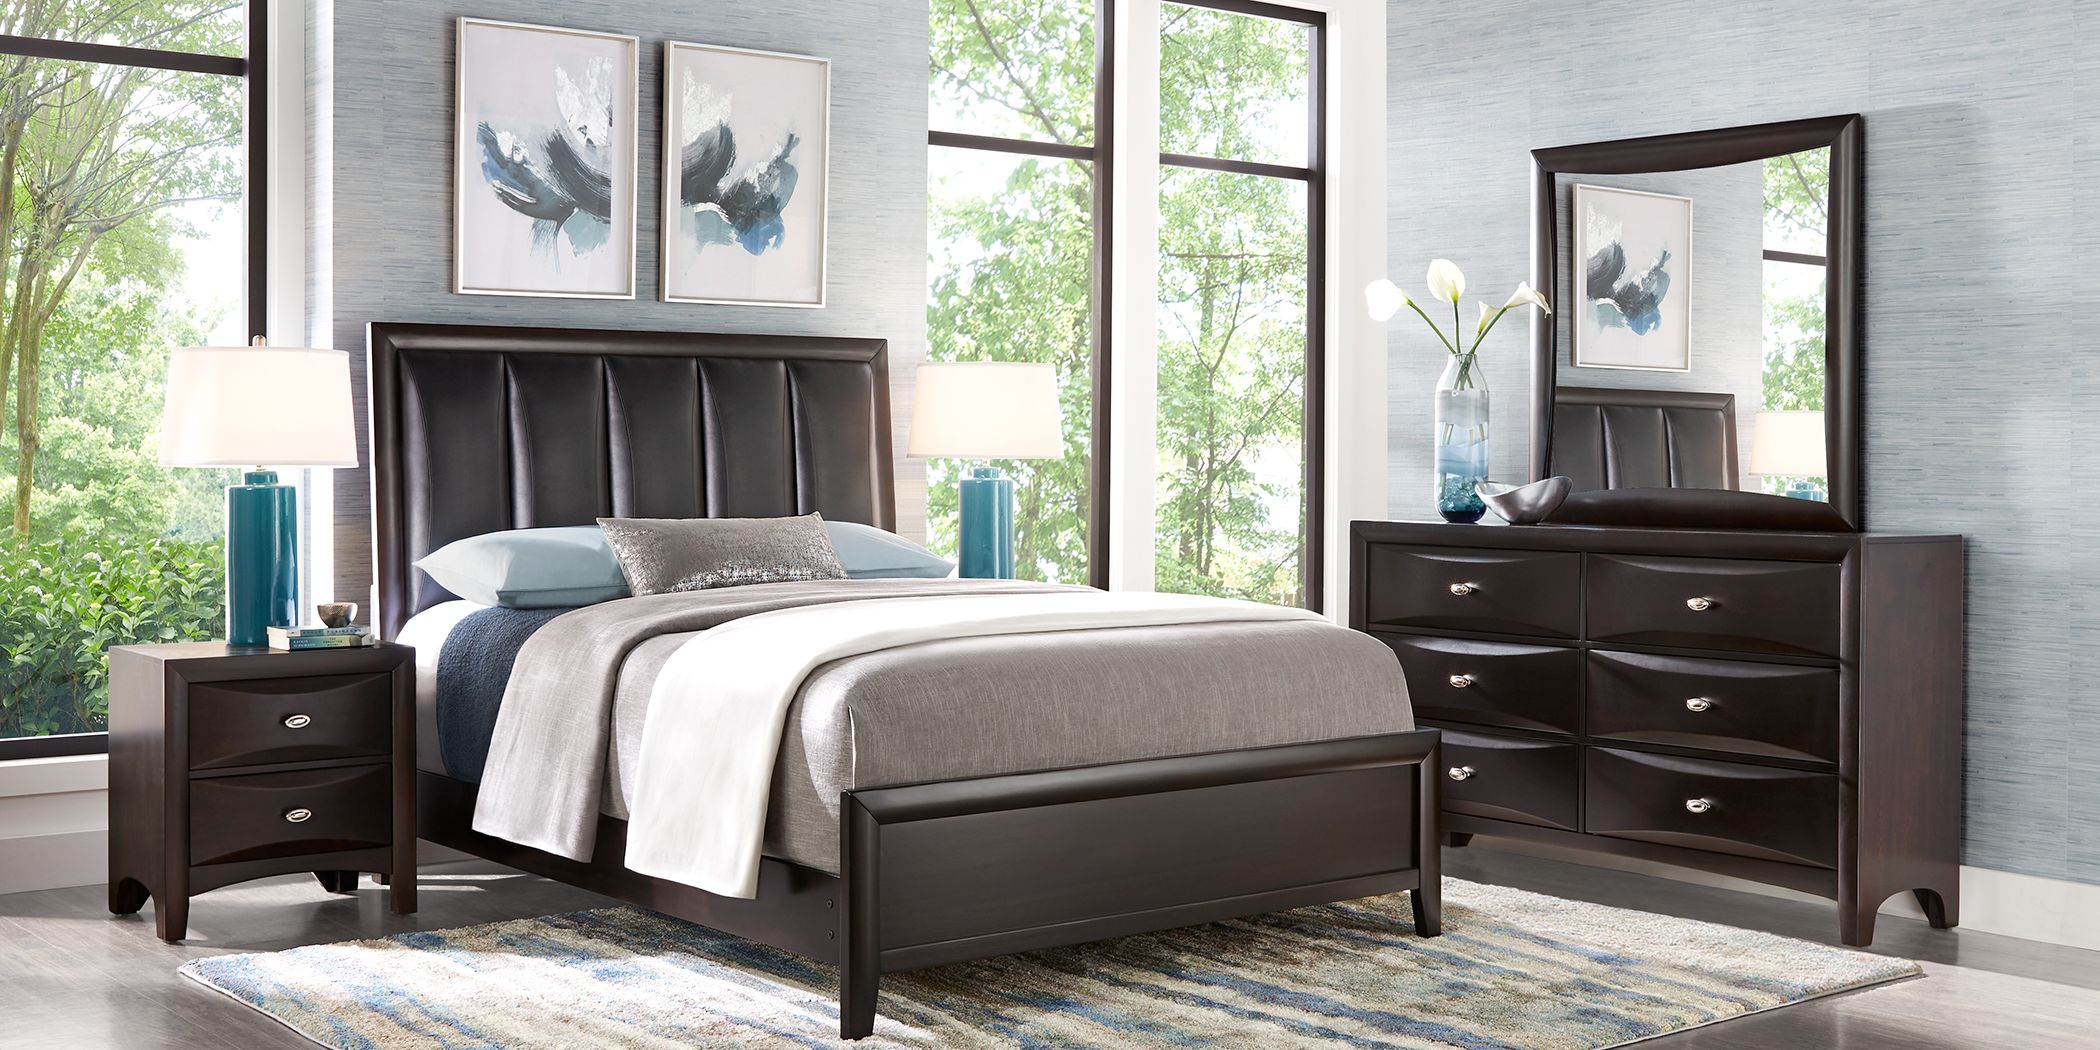 Bedroom Furniture Rooms To, Rooms To Go King Size Bed